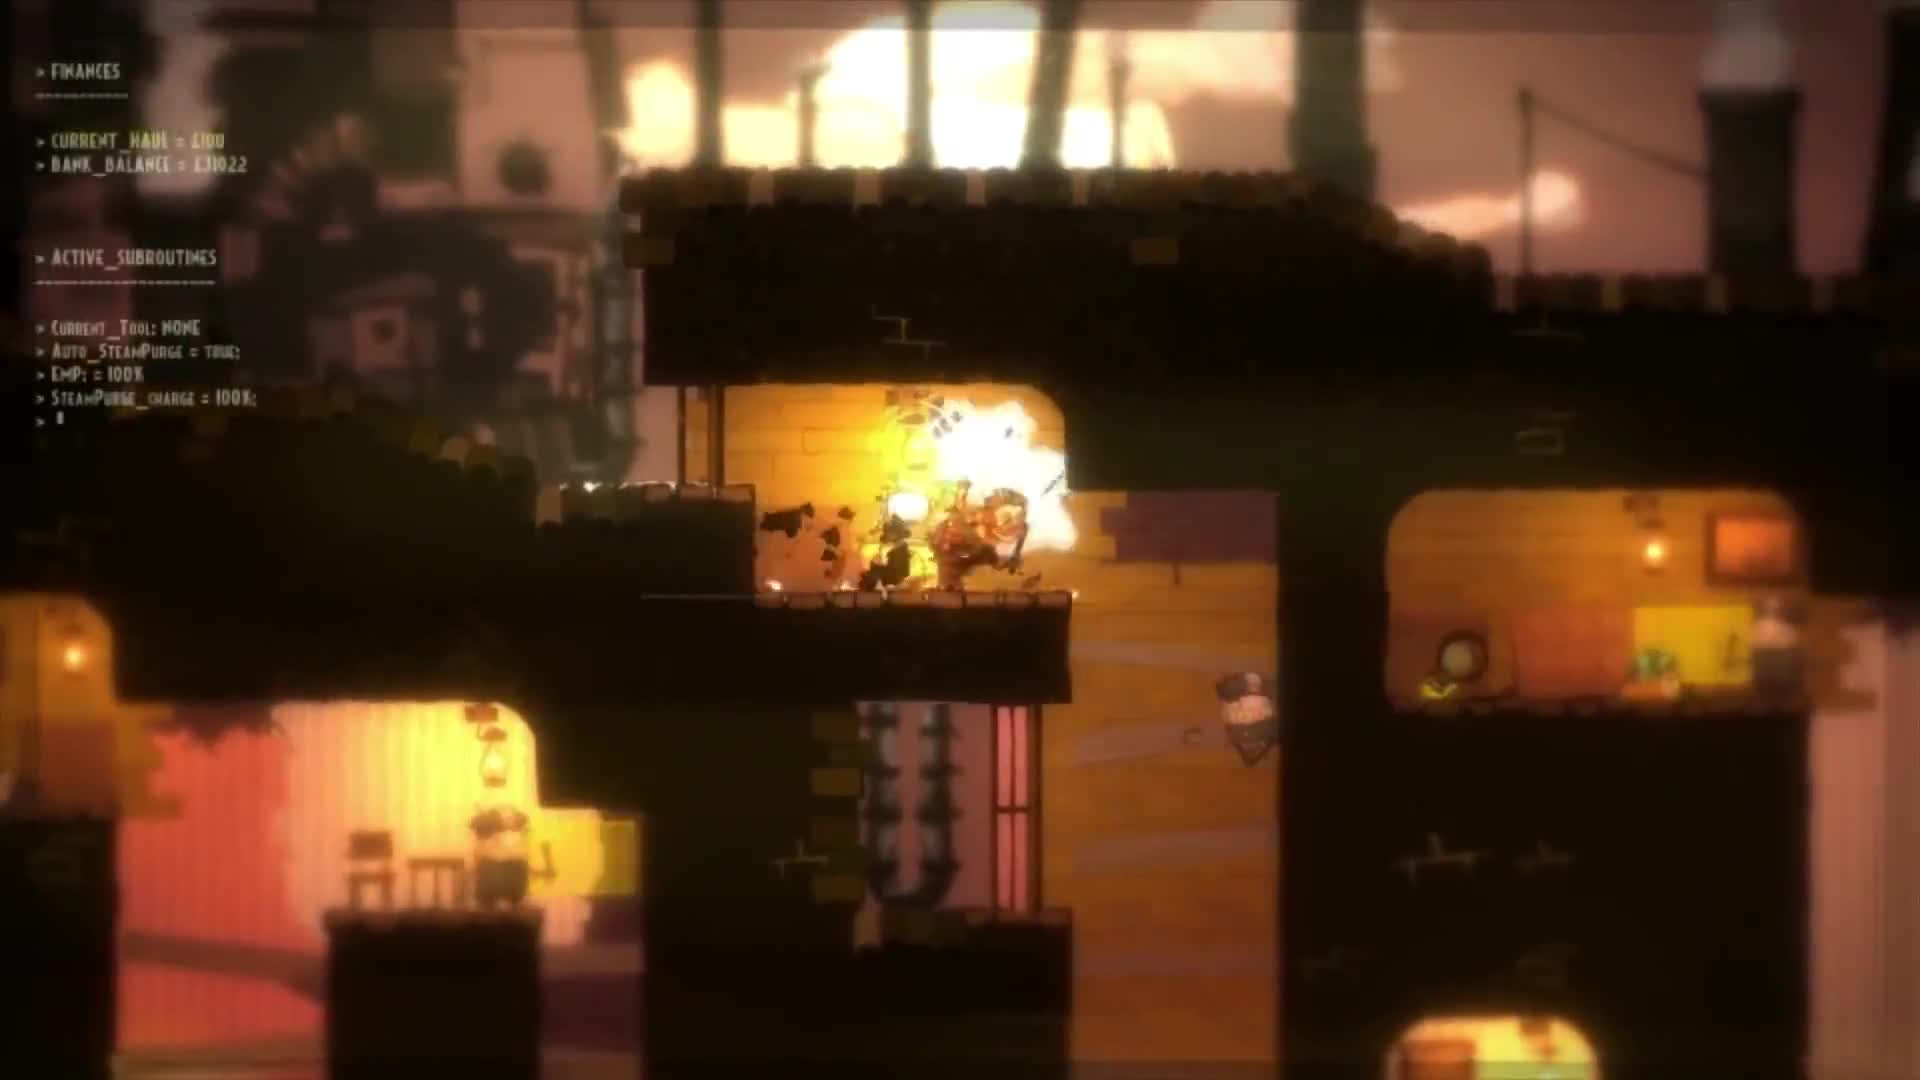 The Swindle - Console Announcement